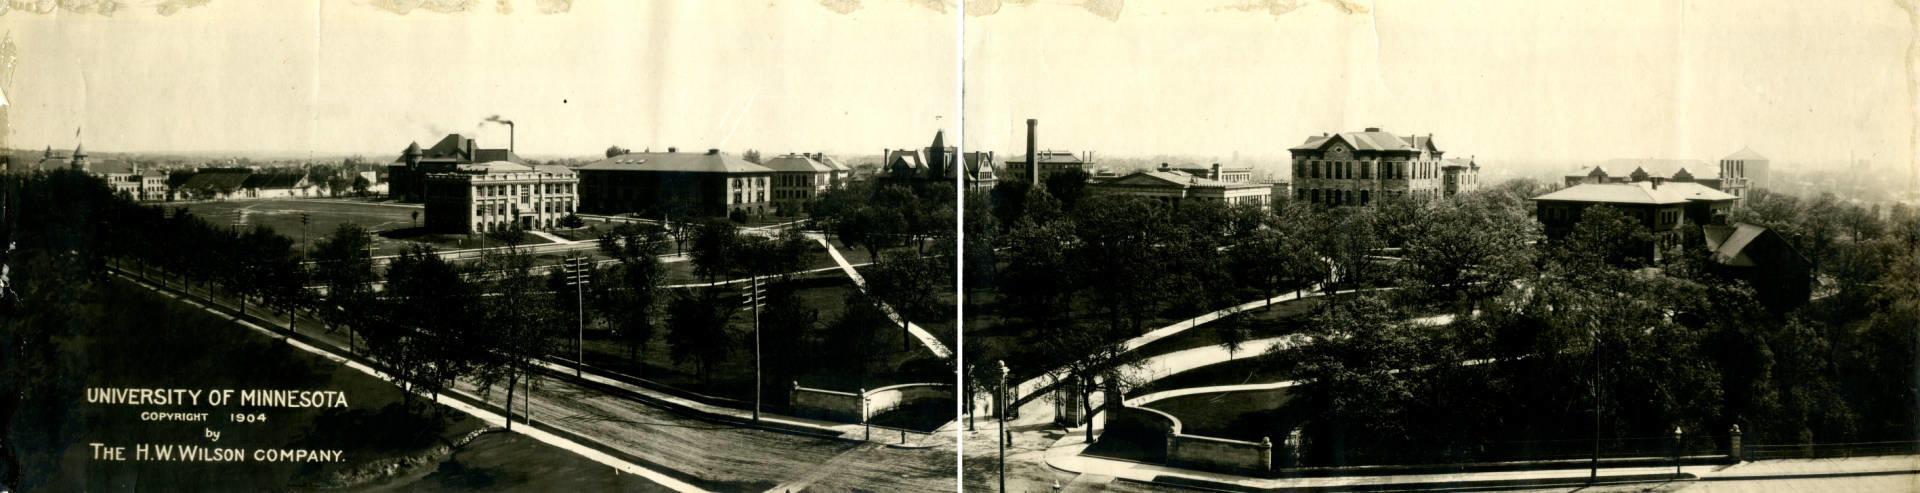 Campus photo, 1904, courtesy of University of Minnesota Libraries, University Archives.